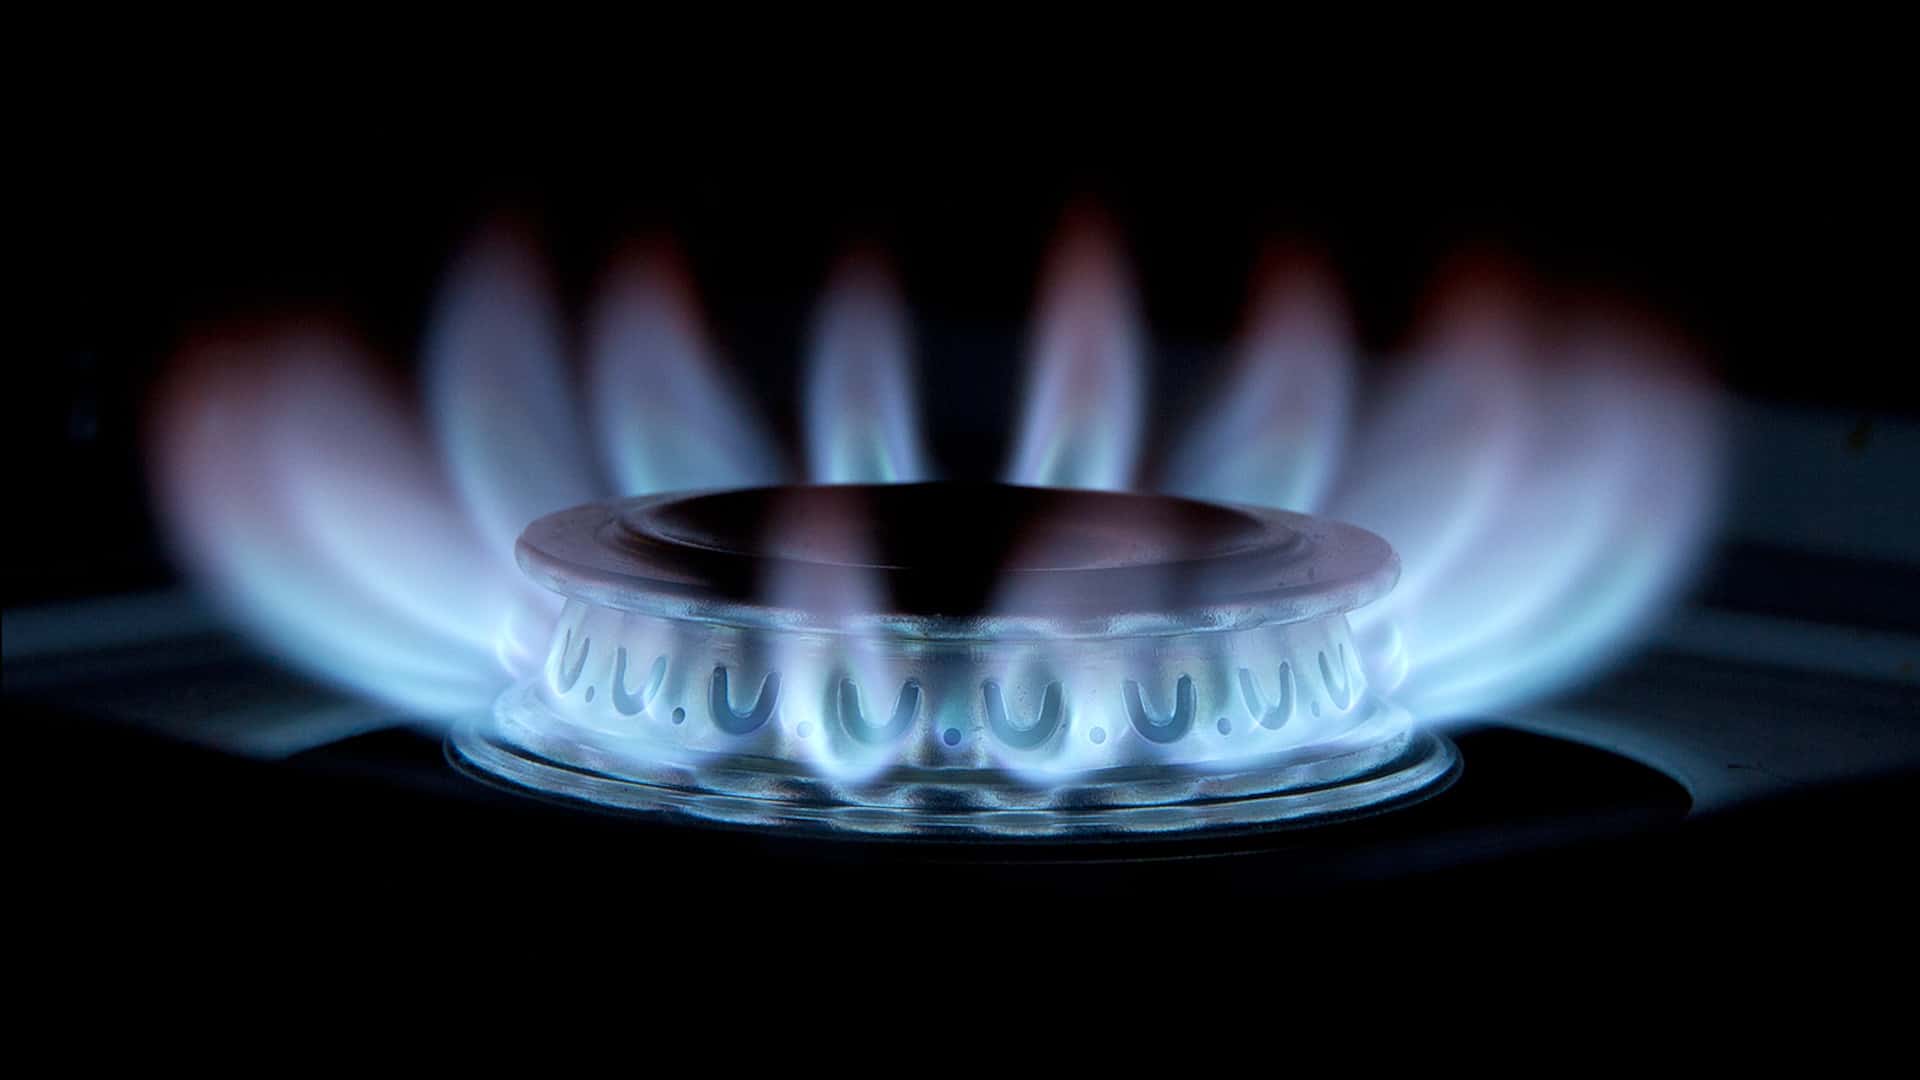 Amid Covid, the Air Hazards of Gas Appliances Draw New Scrutiny